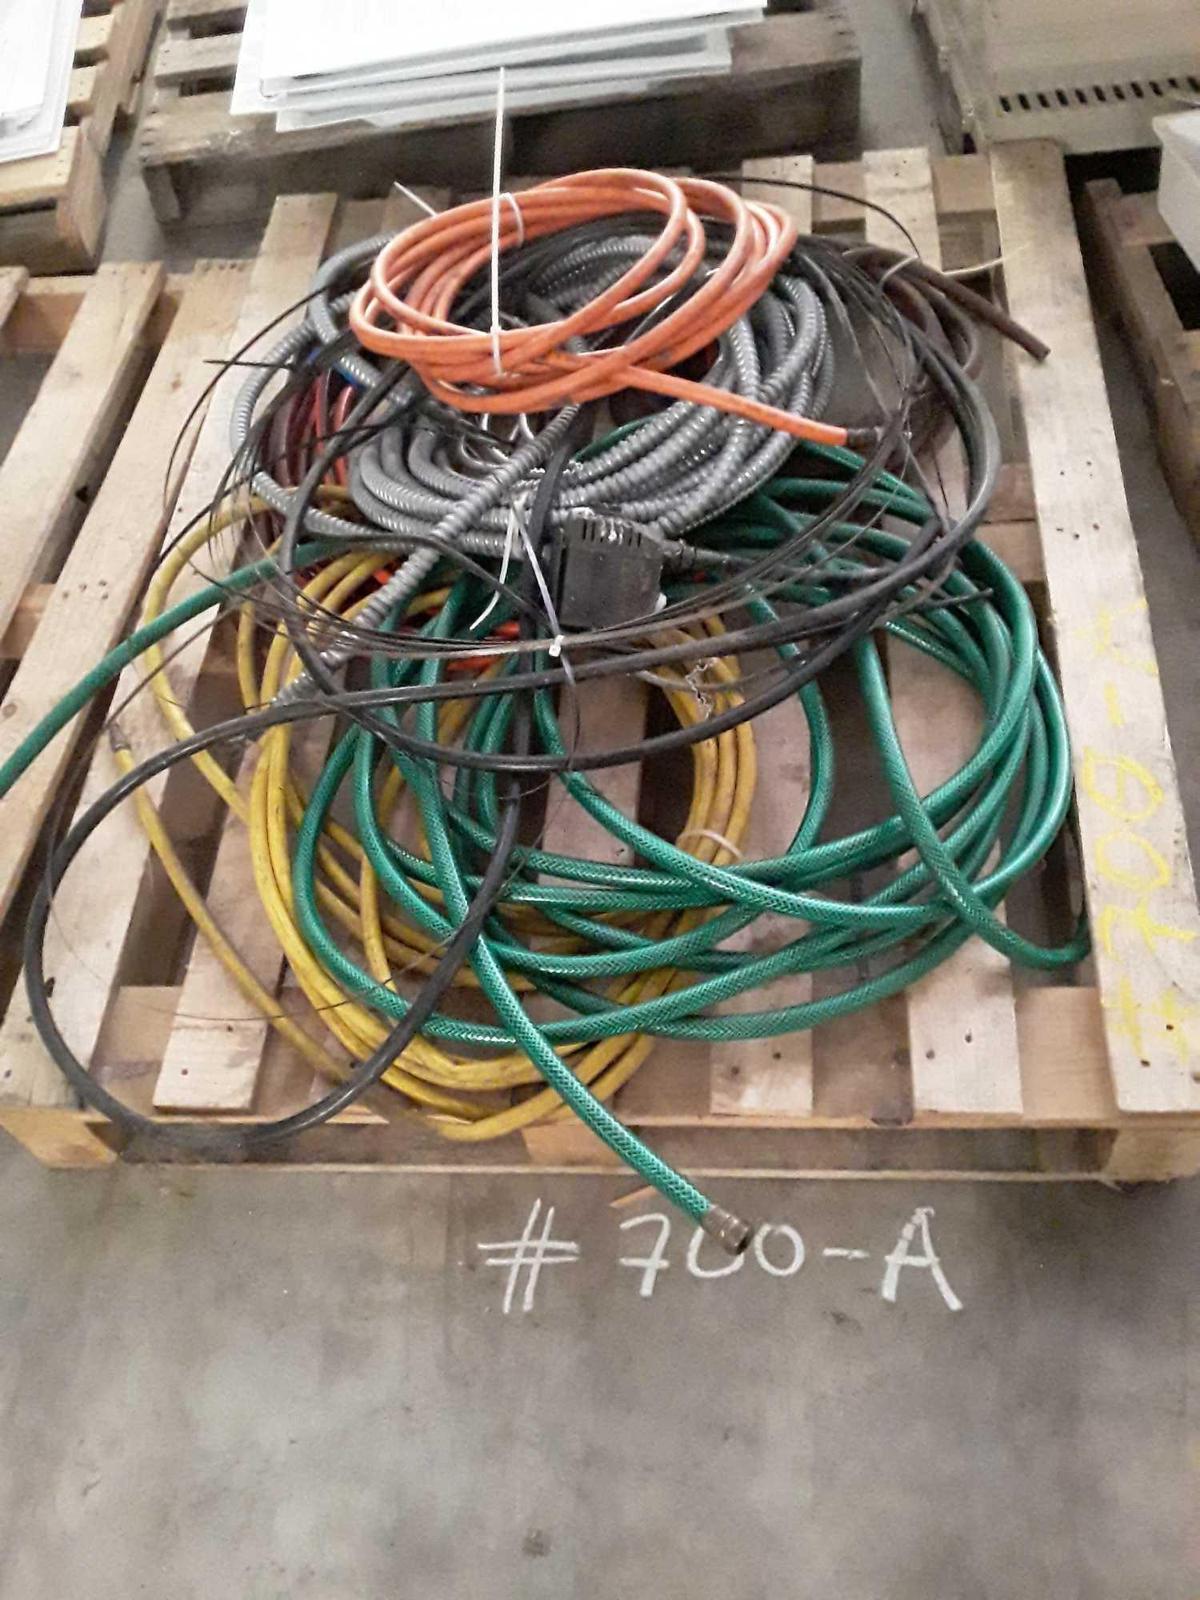 Pallet with Cables and Hoses